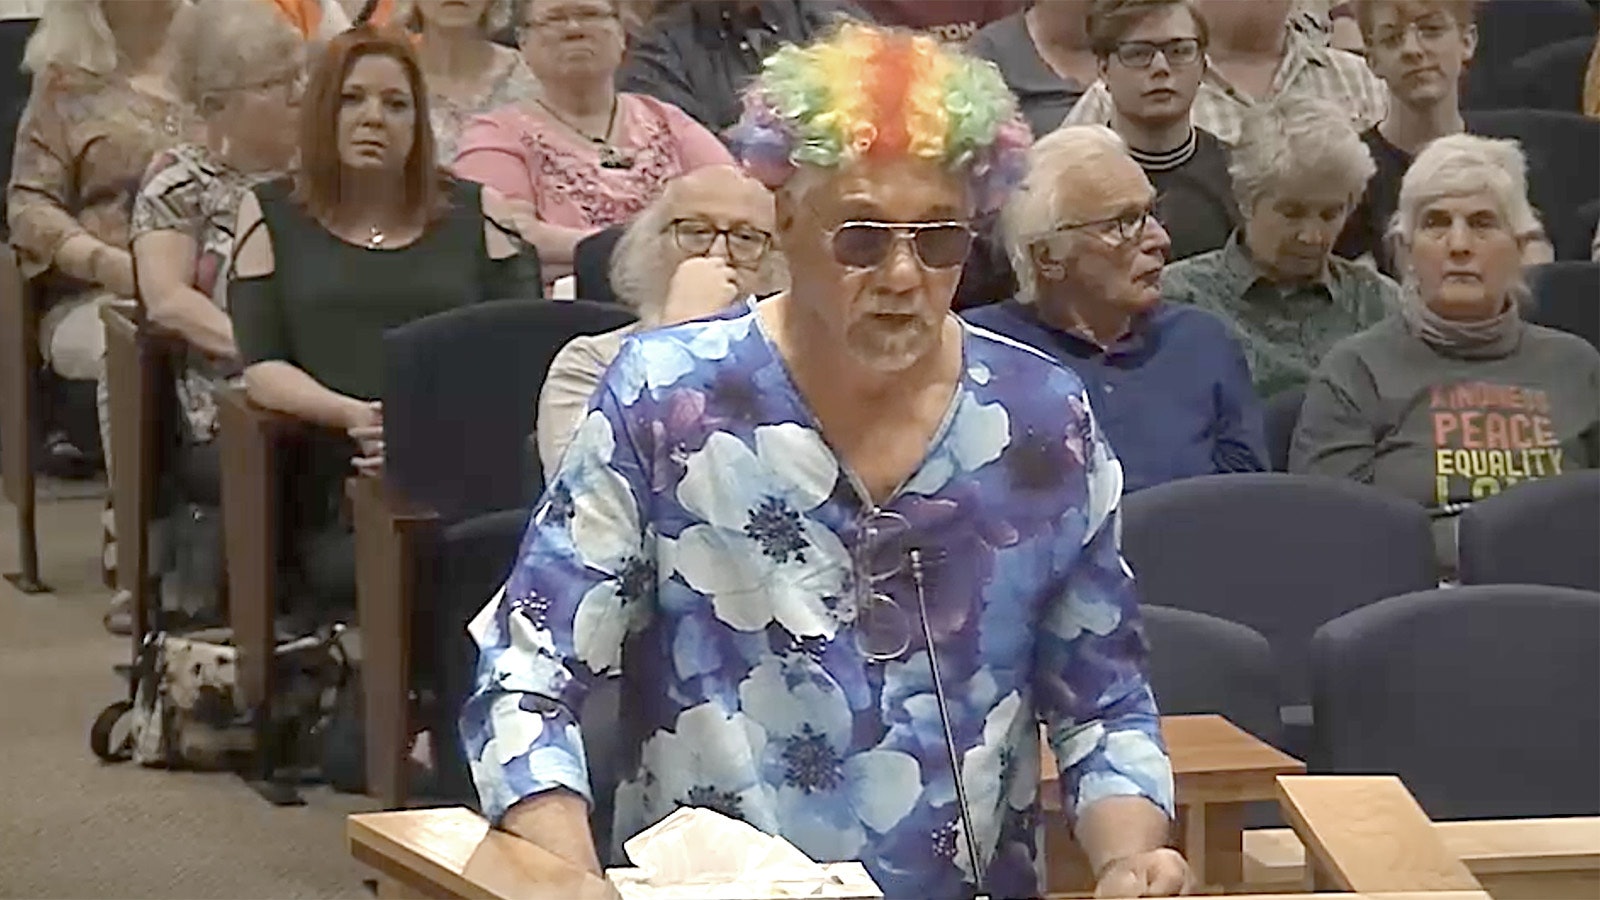 Gillette resident Dean Vomhof makes fashion and political statements at last week's Gillette City Council meeting as he spoke in opposition of a proposed ordinance that would criminalize discrimination in the city.